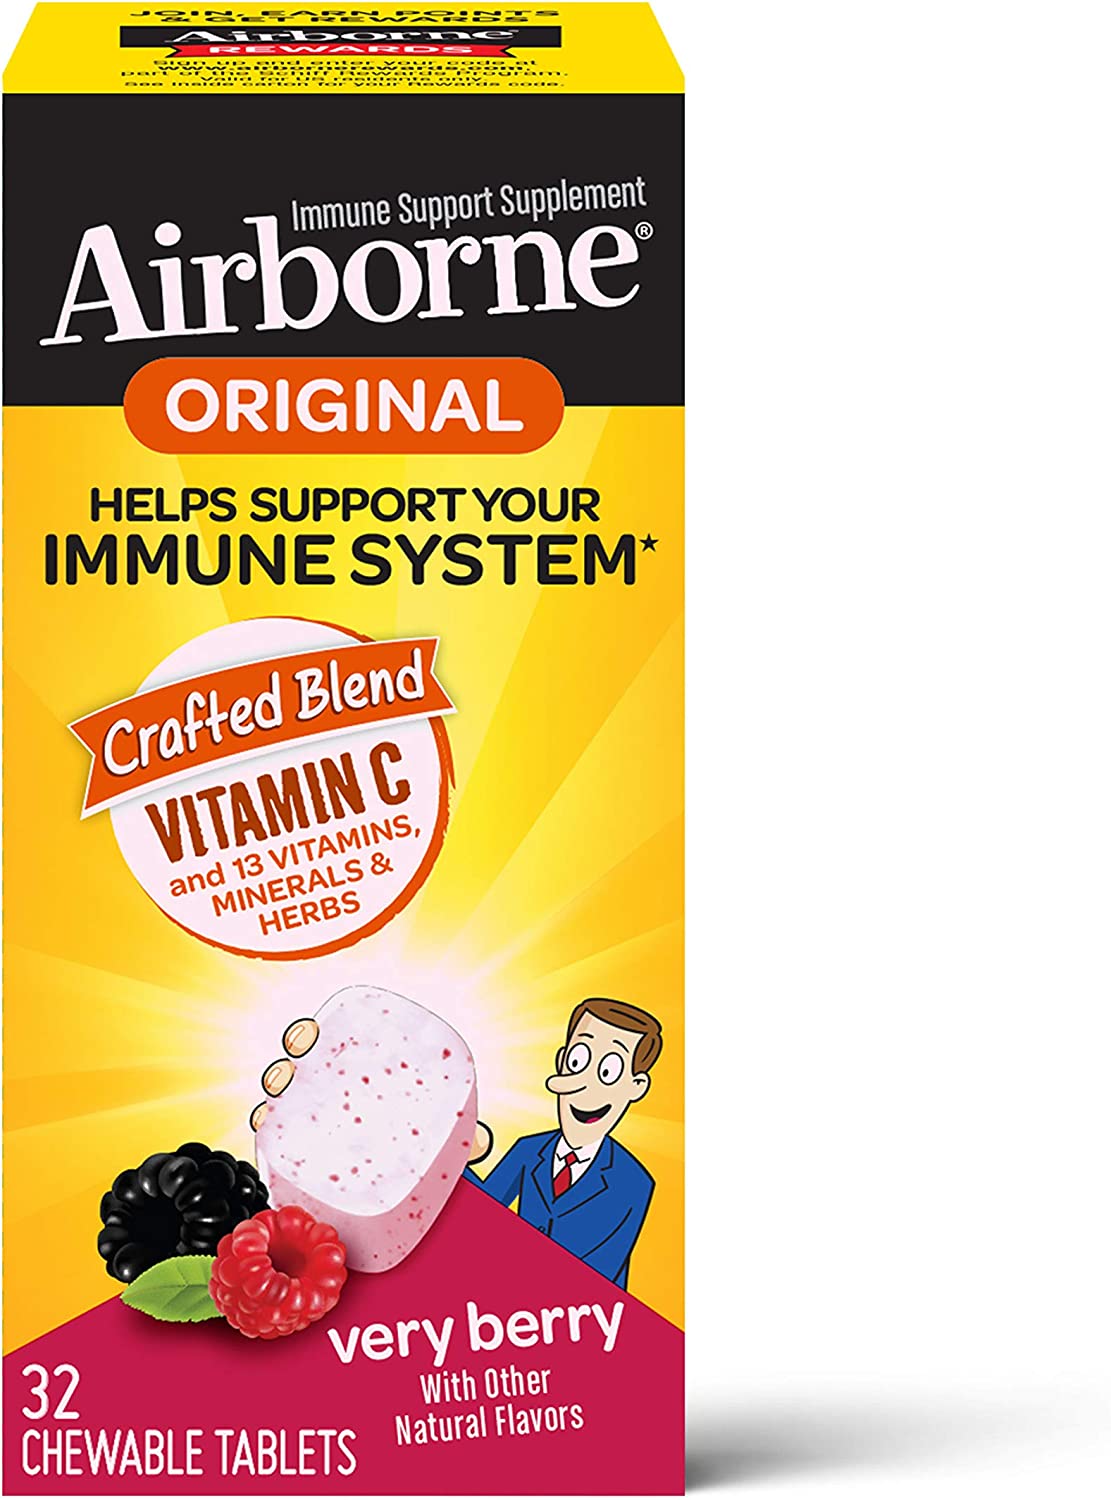 Airborne Vitamin C 1000mg (per serving) – Very Berry Chewable Tablets (32 count in a box), Gluten-Free Immune Support Supplement With Vitamins A C E, ZINC, Selenium, Echinacea, Ginger, Antioxidants